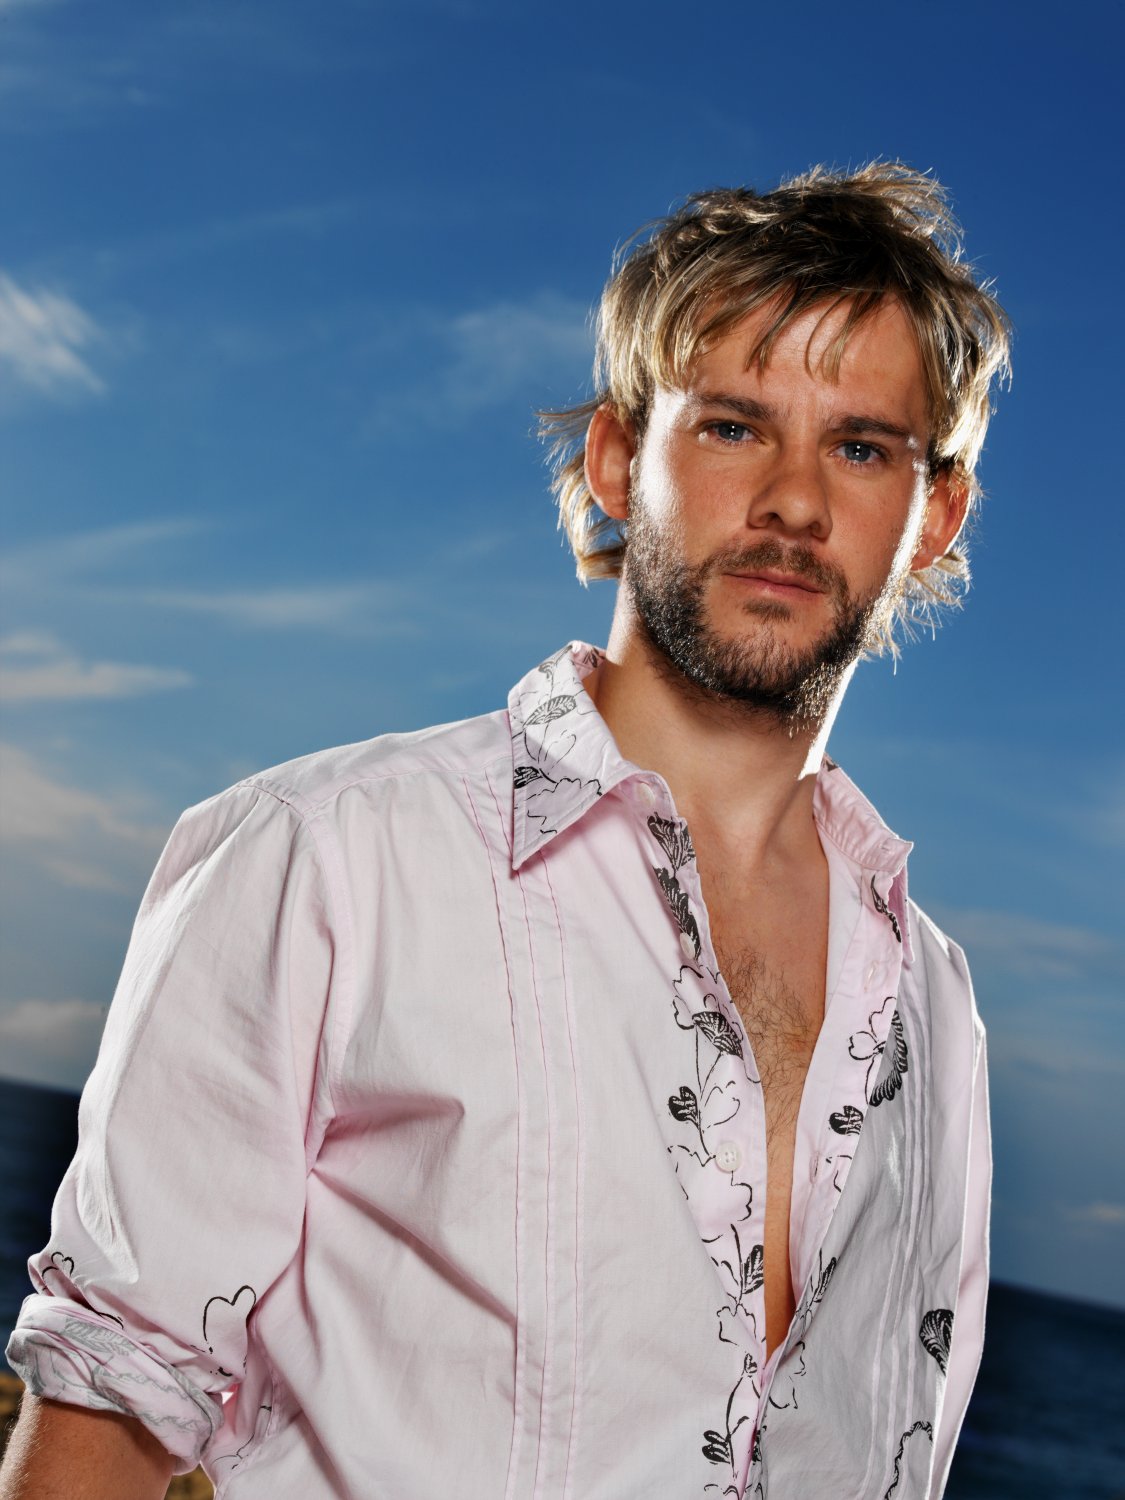 Dominic Monaghan | The Wiki to Rule All | Fandom